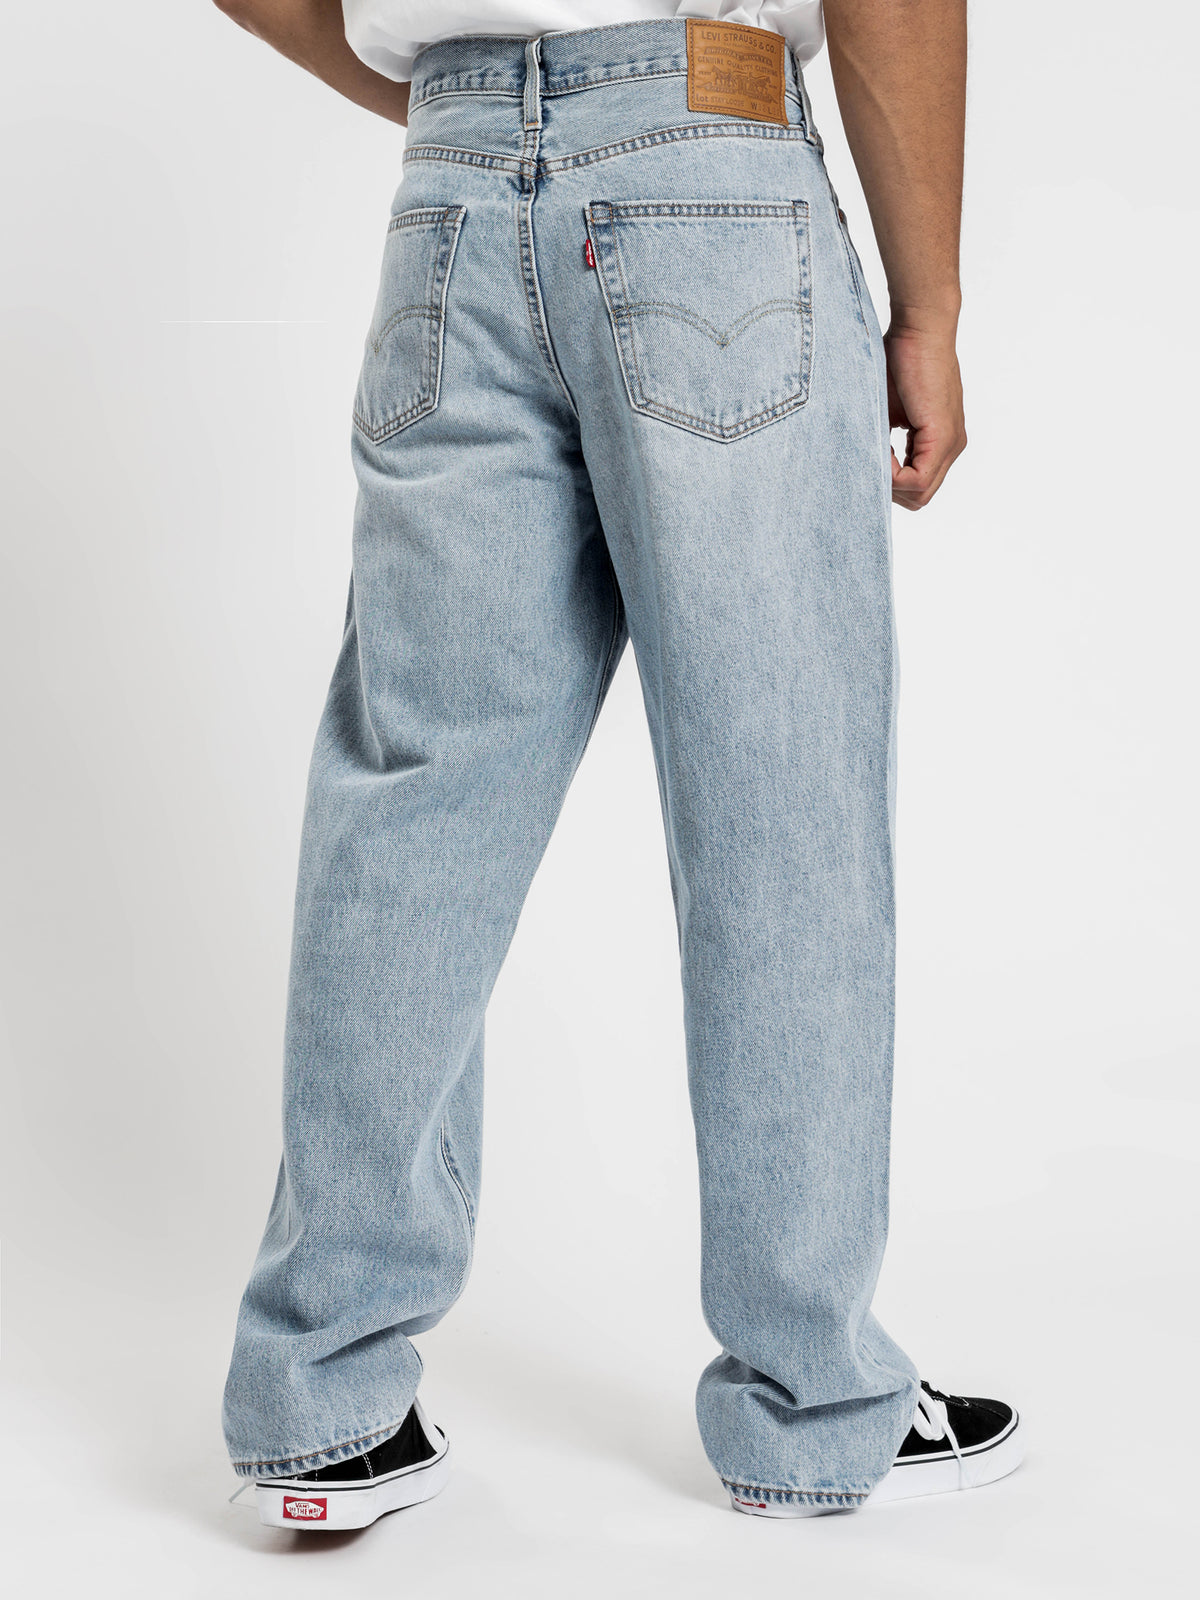 Stay Loose Jeans in Make Me